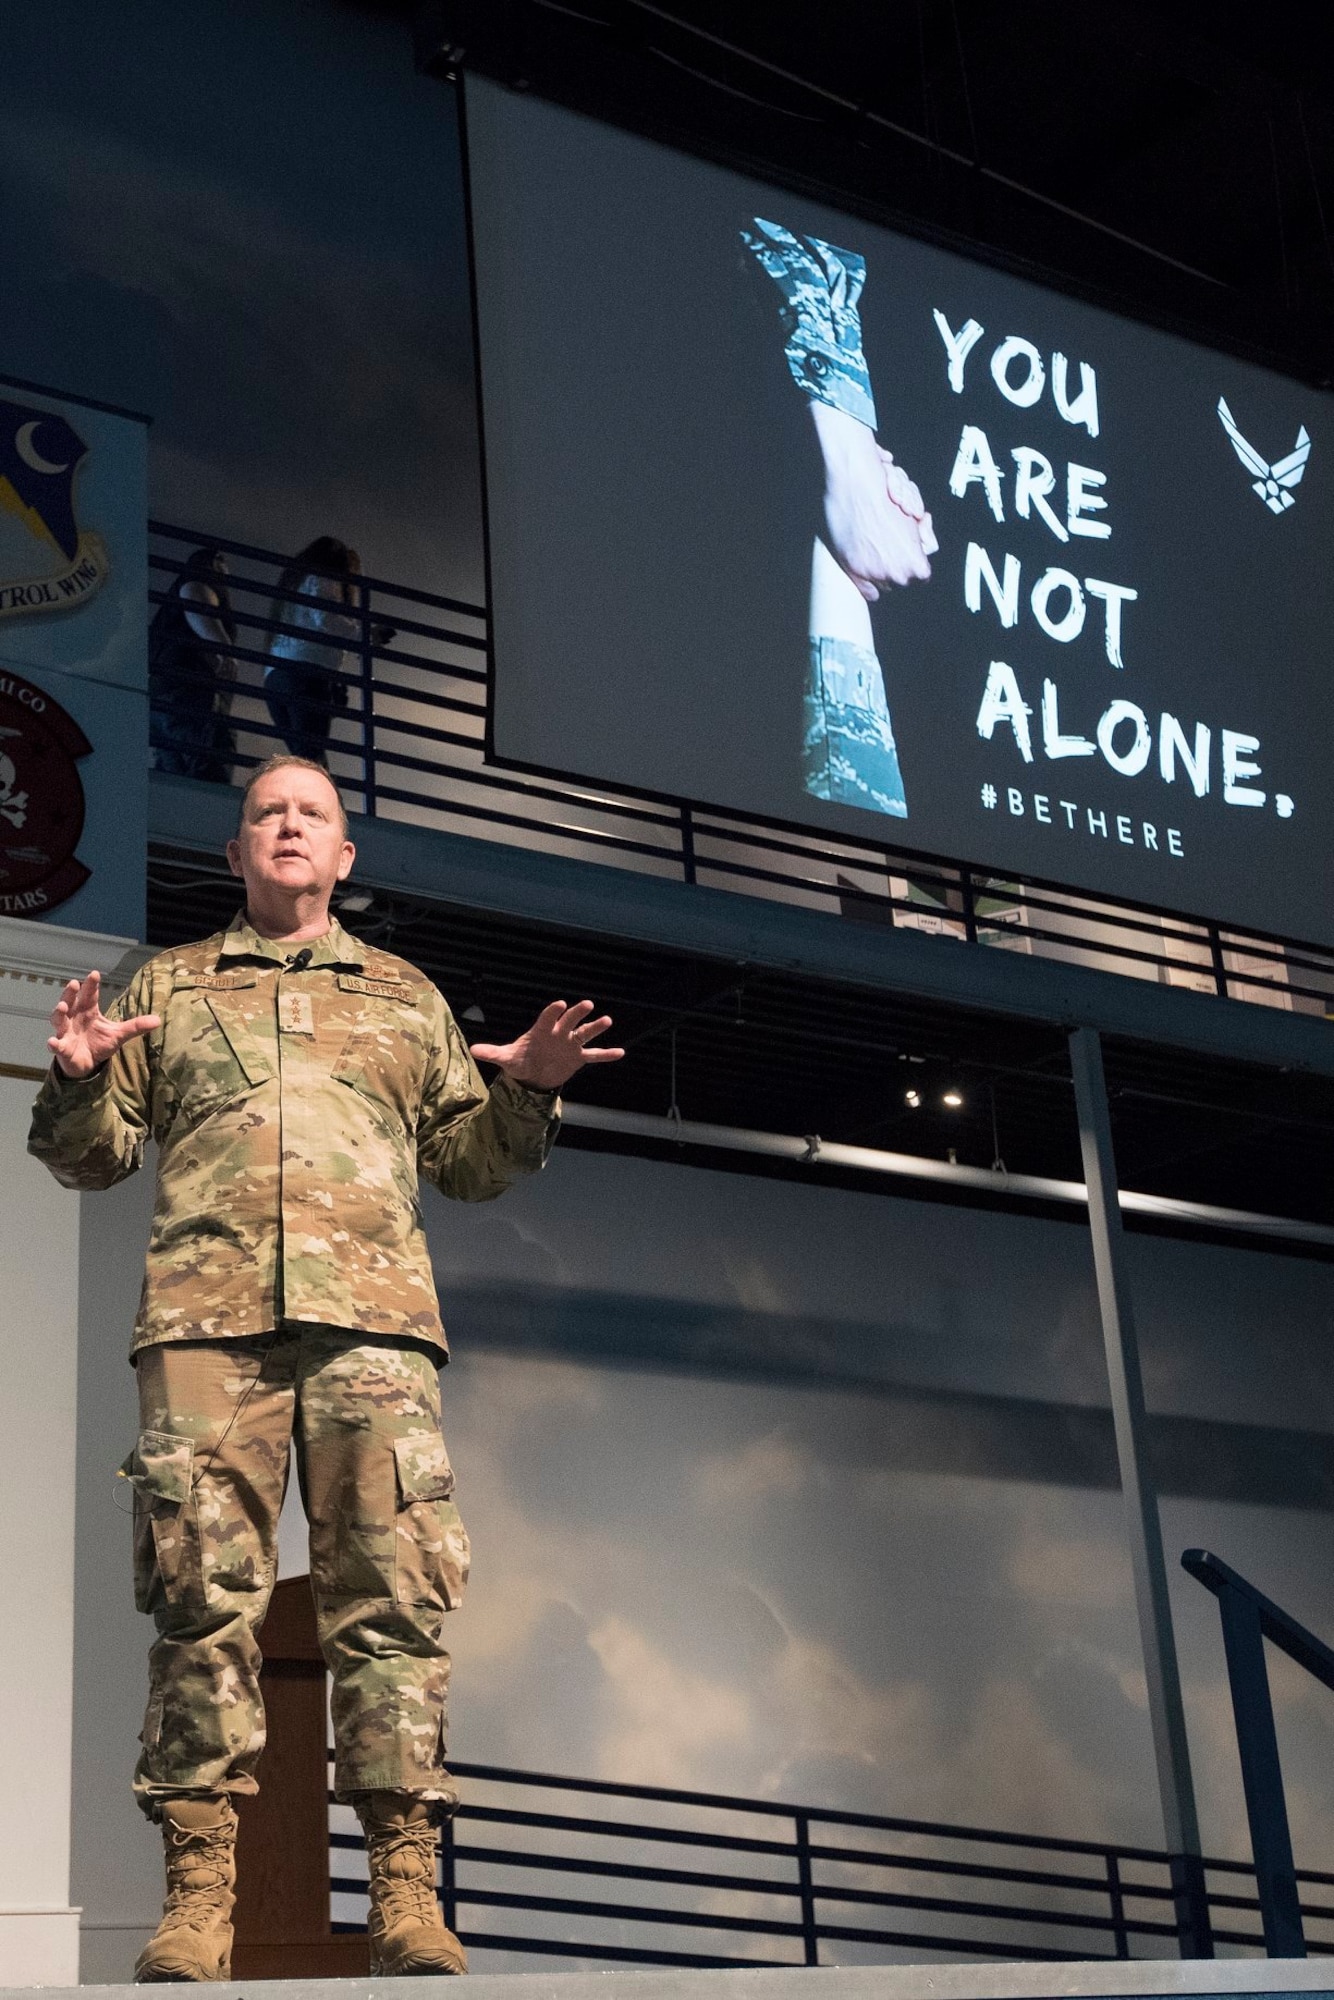 Lt. Gen. Richard W. Scobee, Commander, Air Force Reserve Command, briefs about the importance of seeking mental health help during a resiliency briefing at the Museum of Aviation, Warner Robins, Georgia, Sept 3, 2019. (U.S. Air Force photo by MSgt Stephen D. Schester)